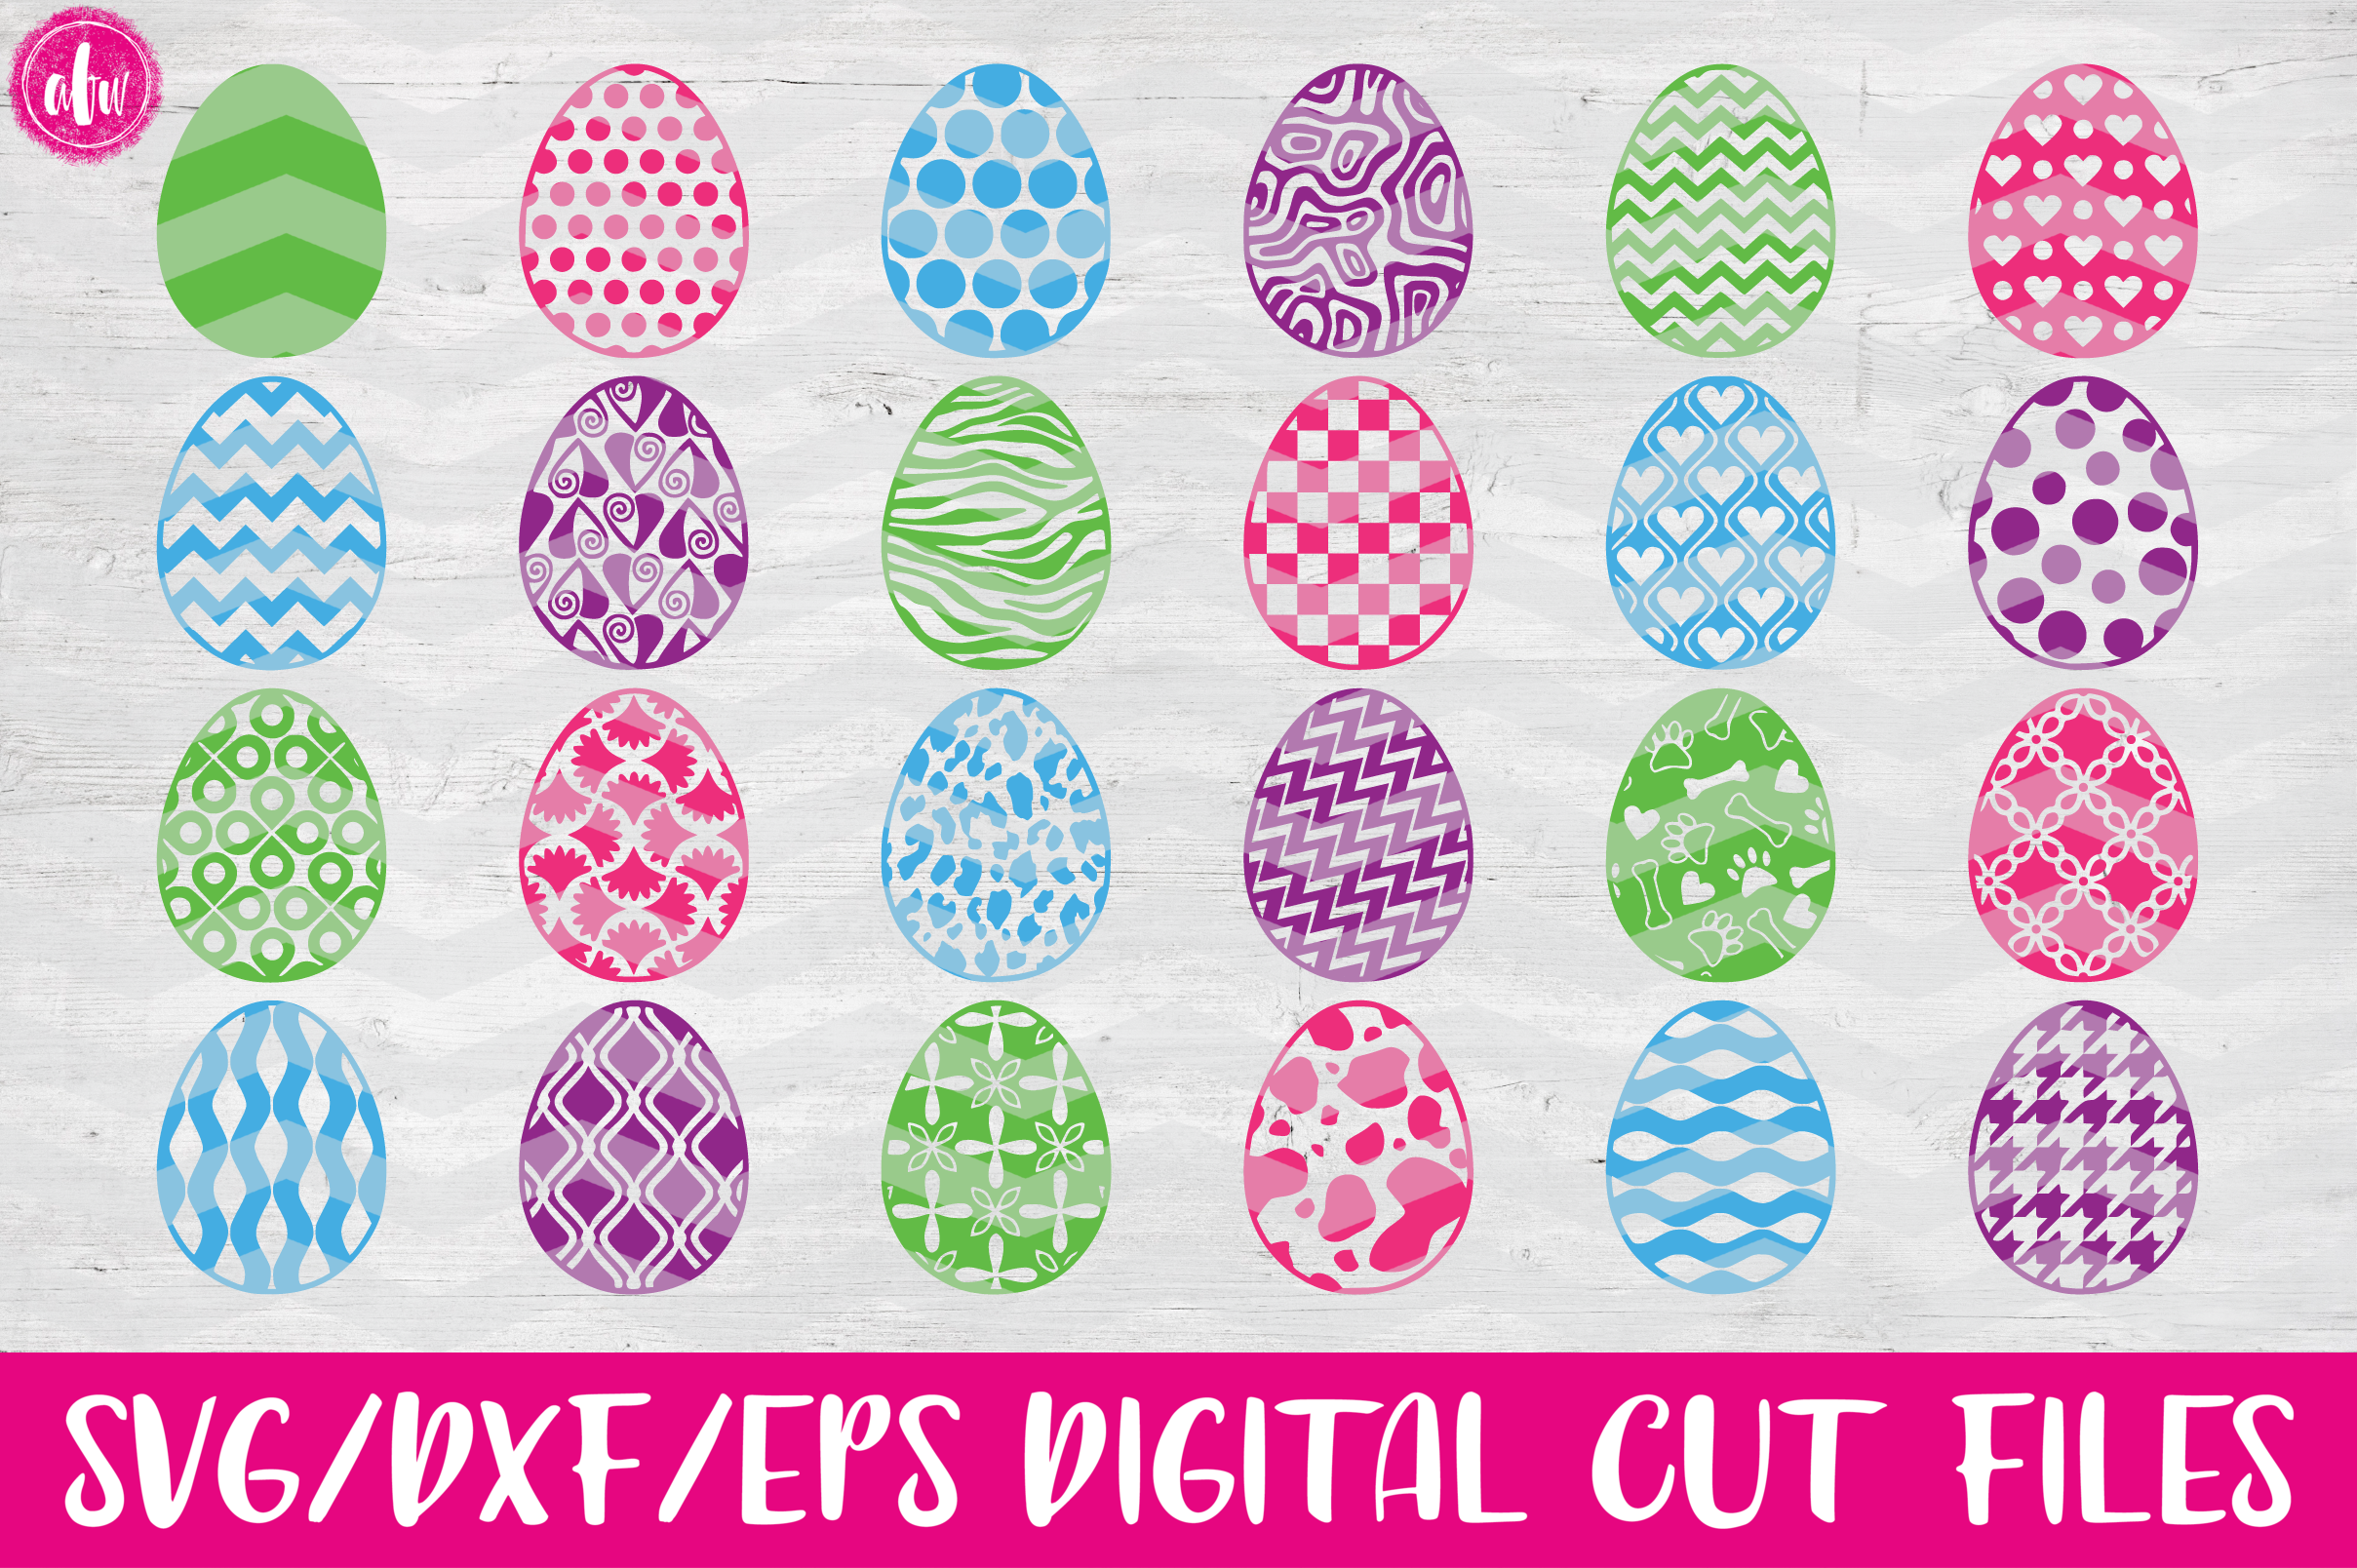 Download Pattern Easter Eggs Set of 40 - SVG, DXF, EPS Cut Files ...